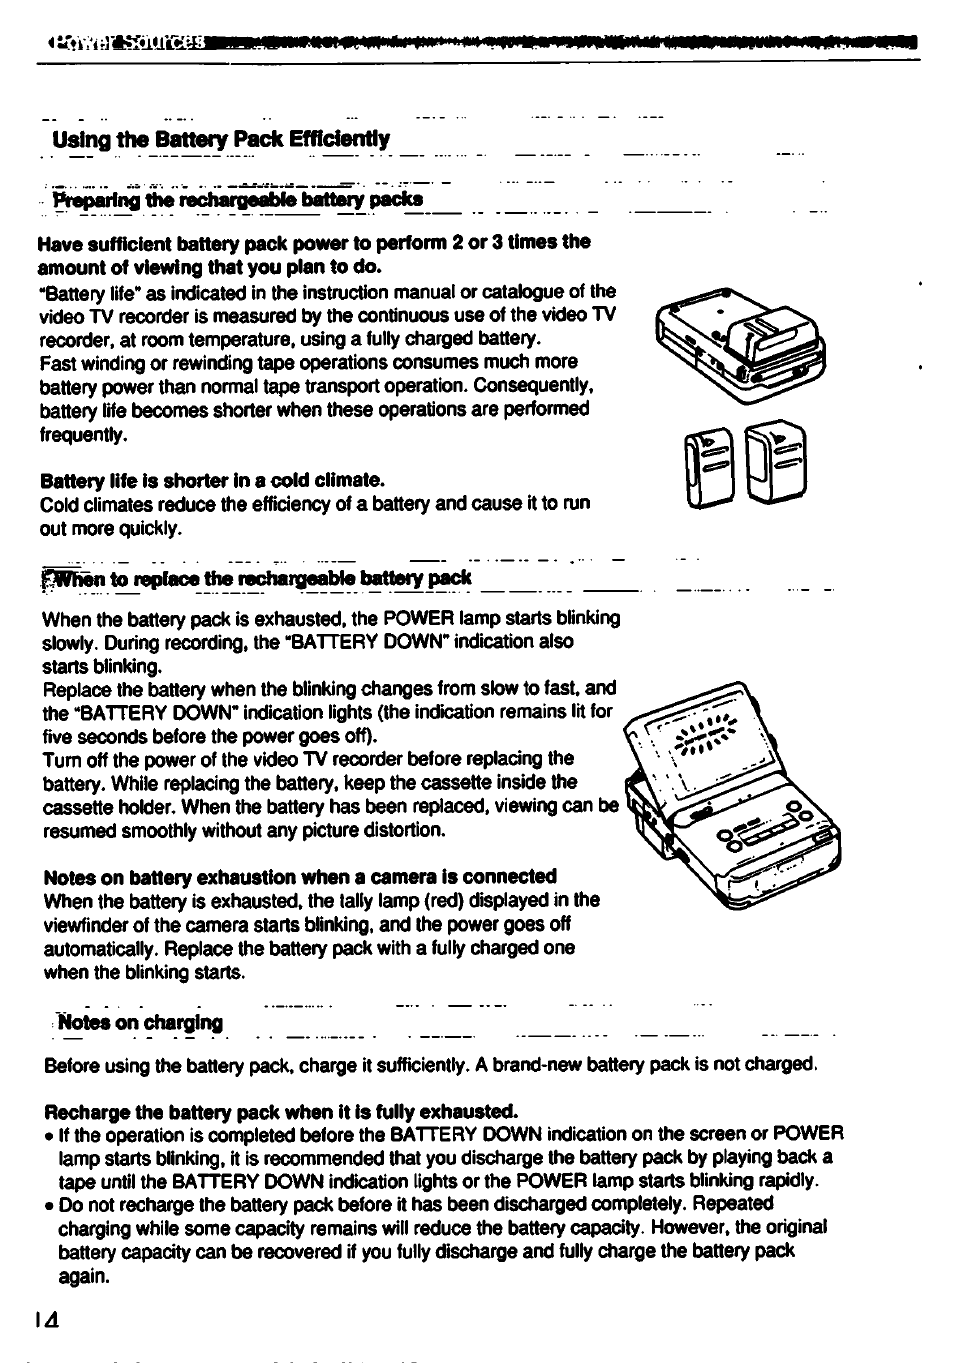 Using the battery pack efficiently | Sony GV-500 User Manual | Page 14 / 84